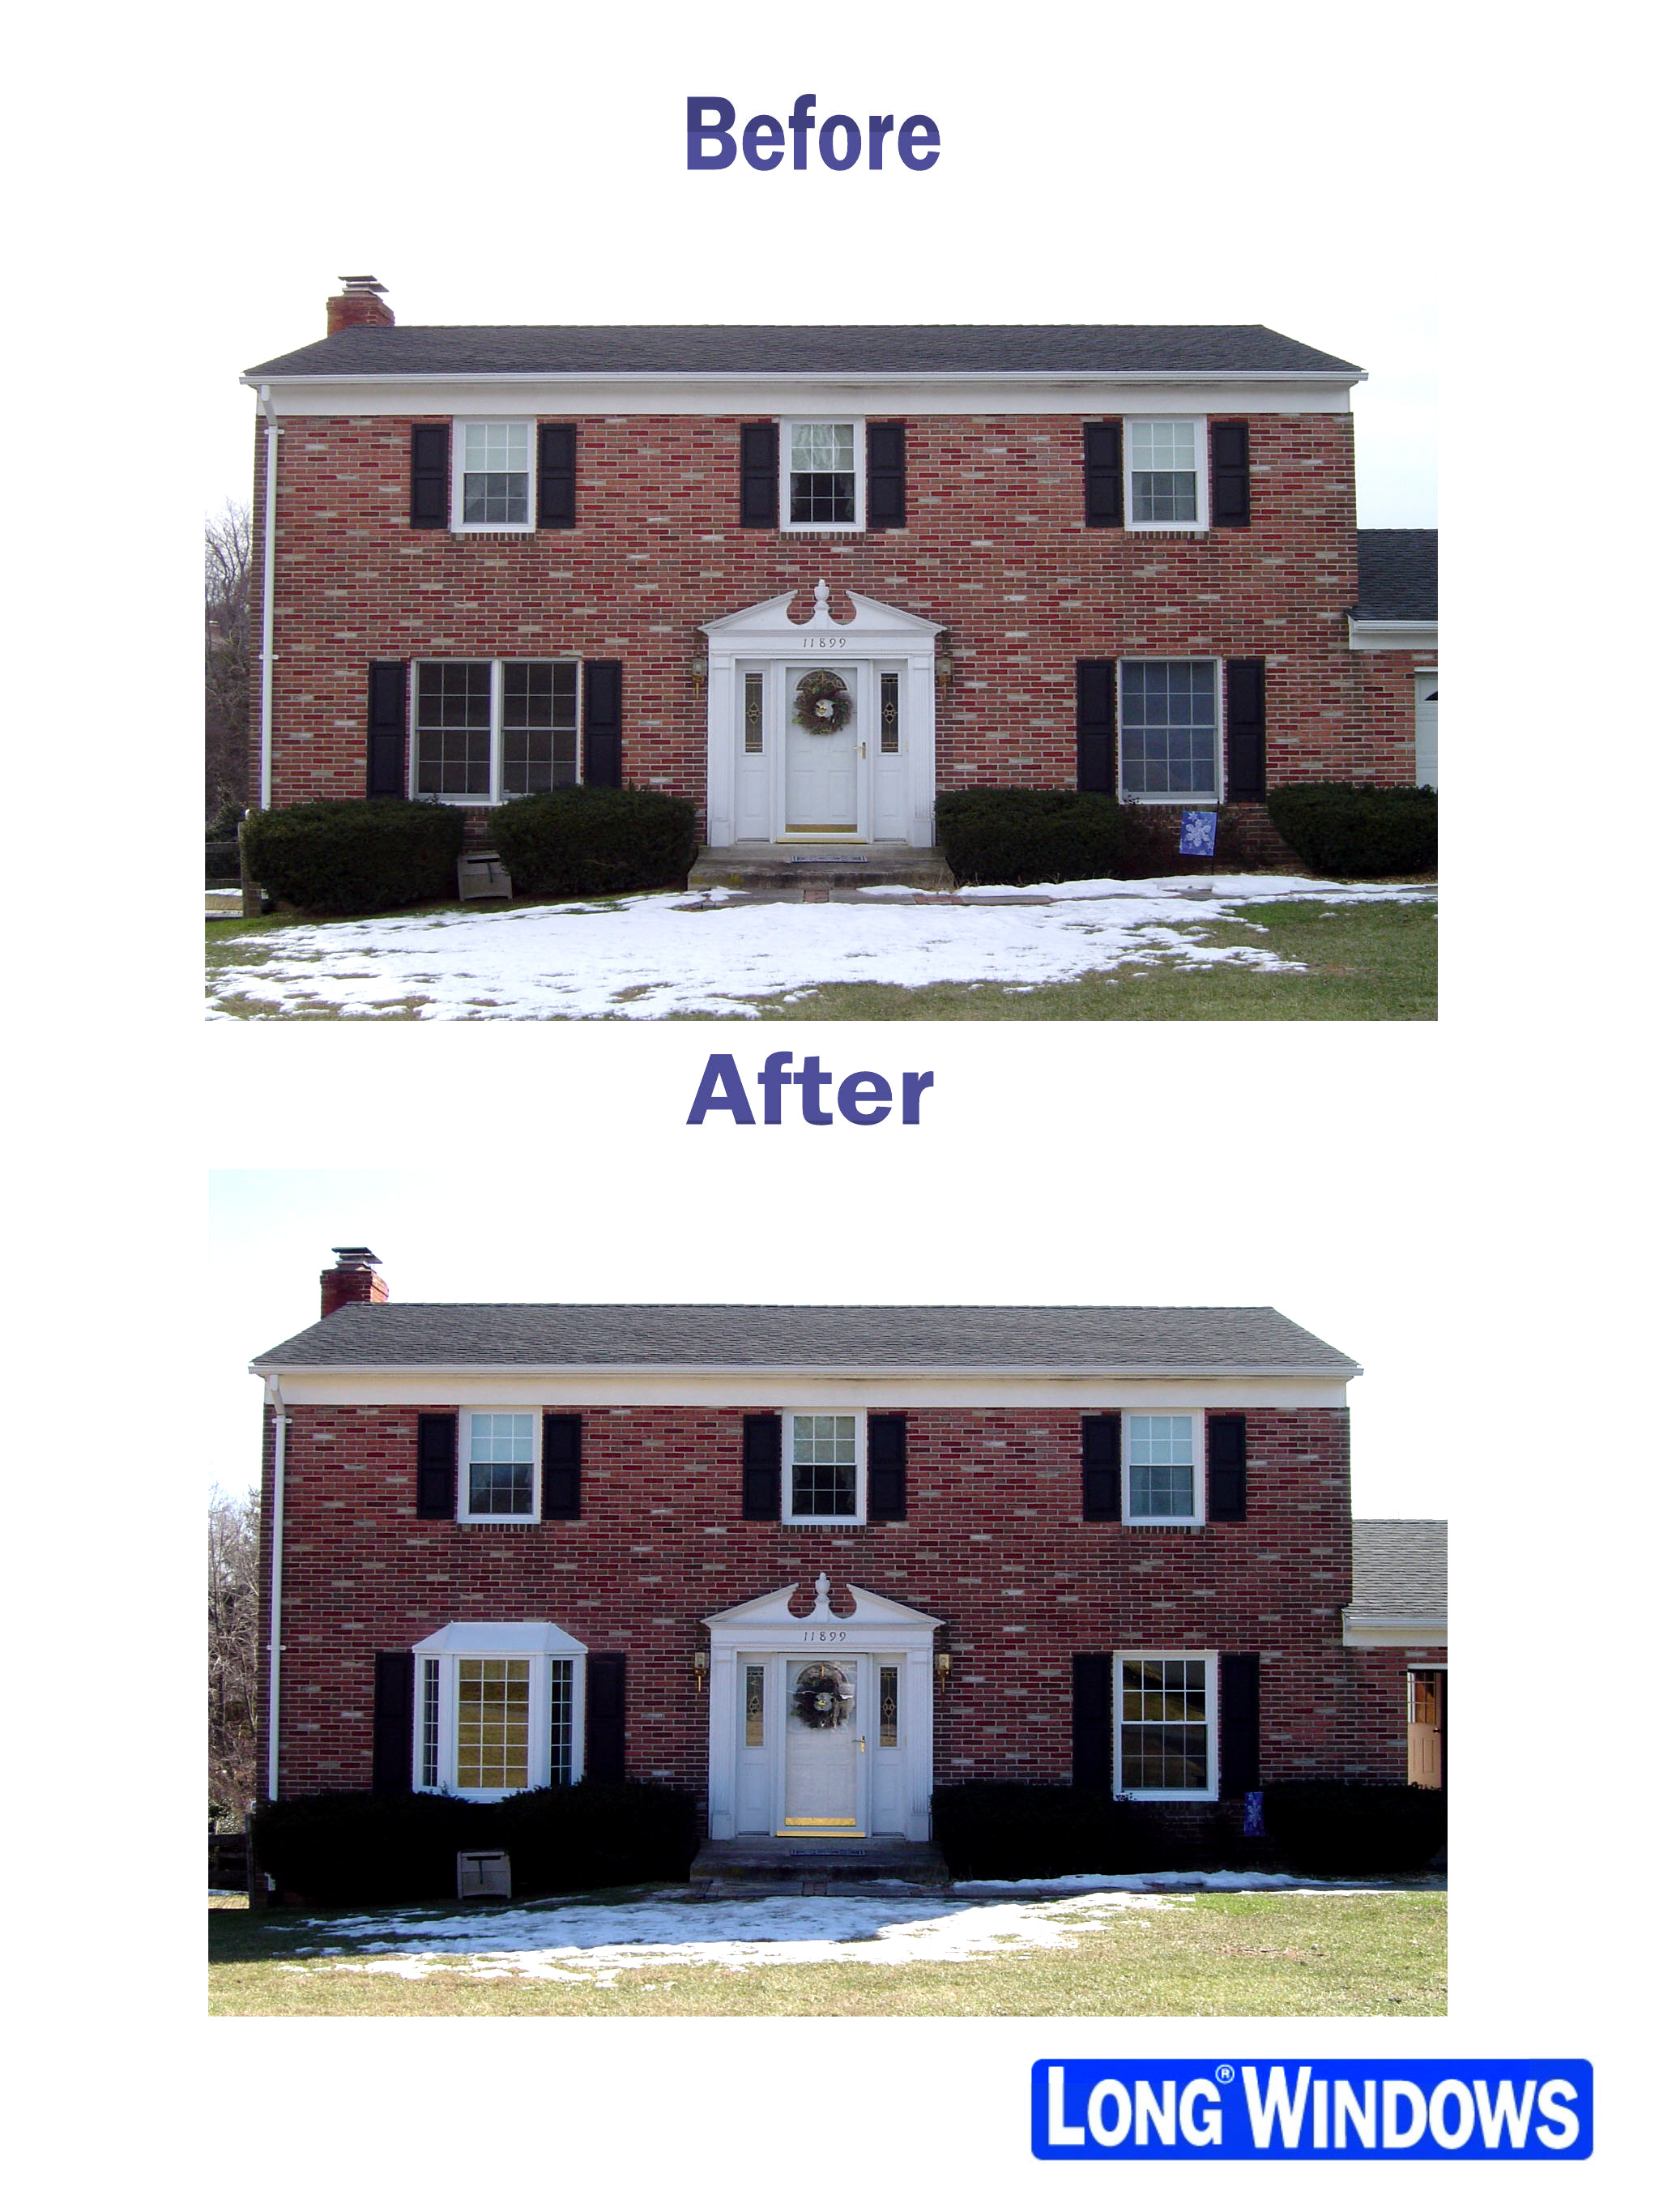 Window design before and after.